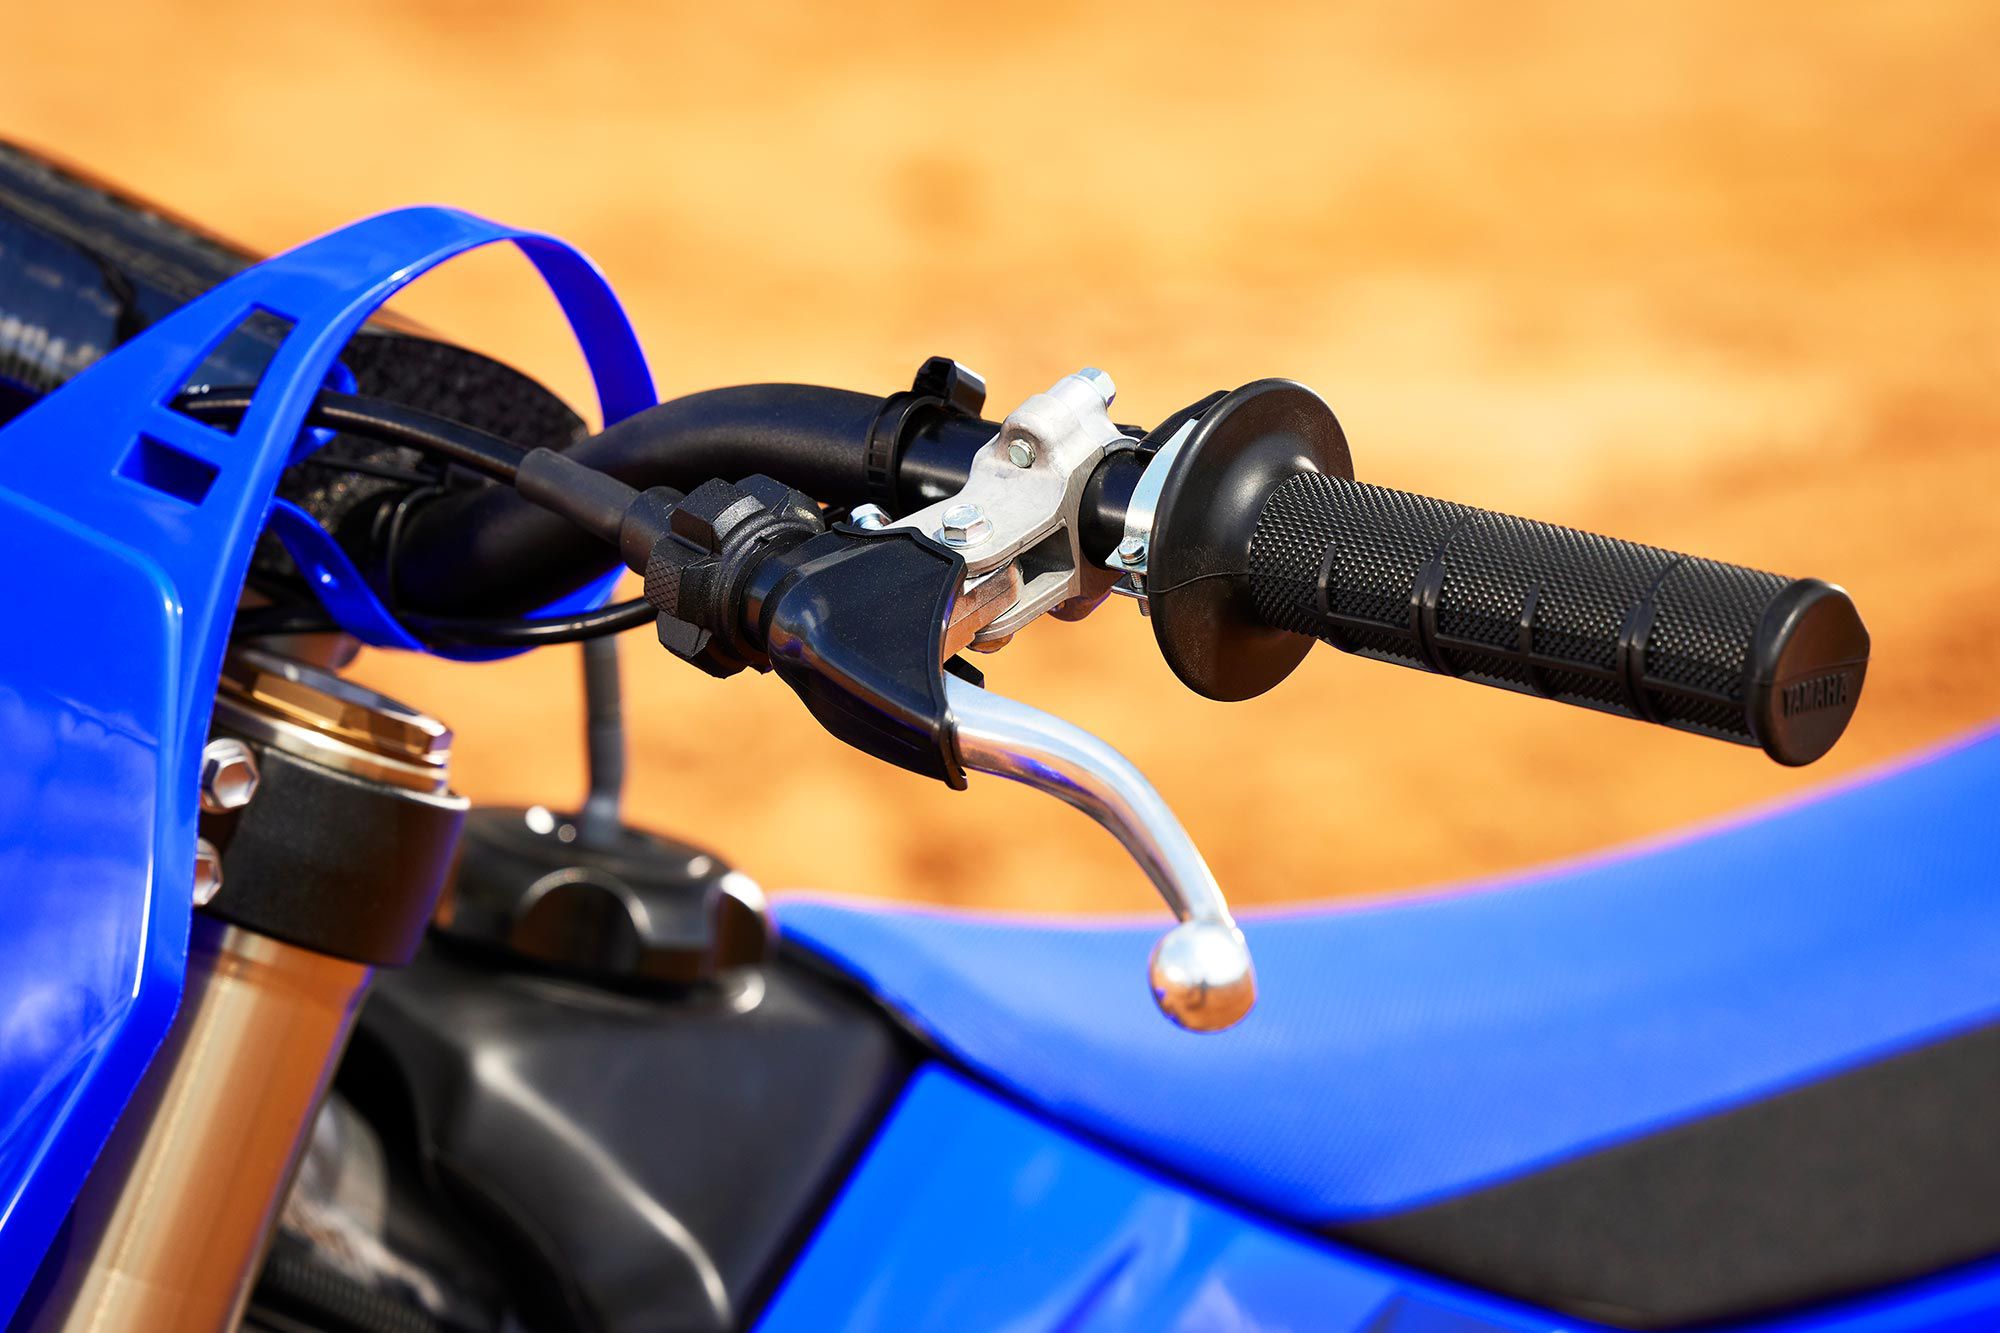 The clutch lever is adjustable.